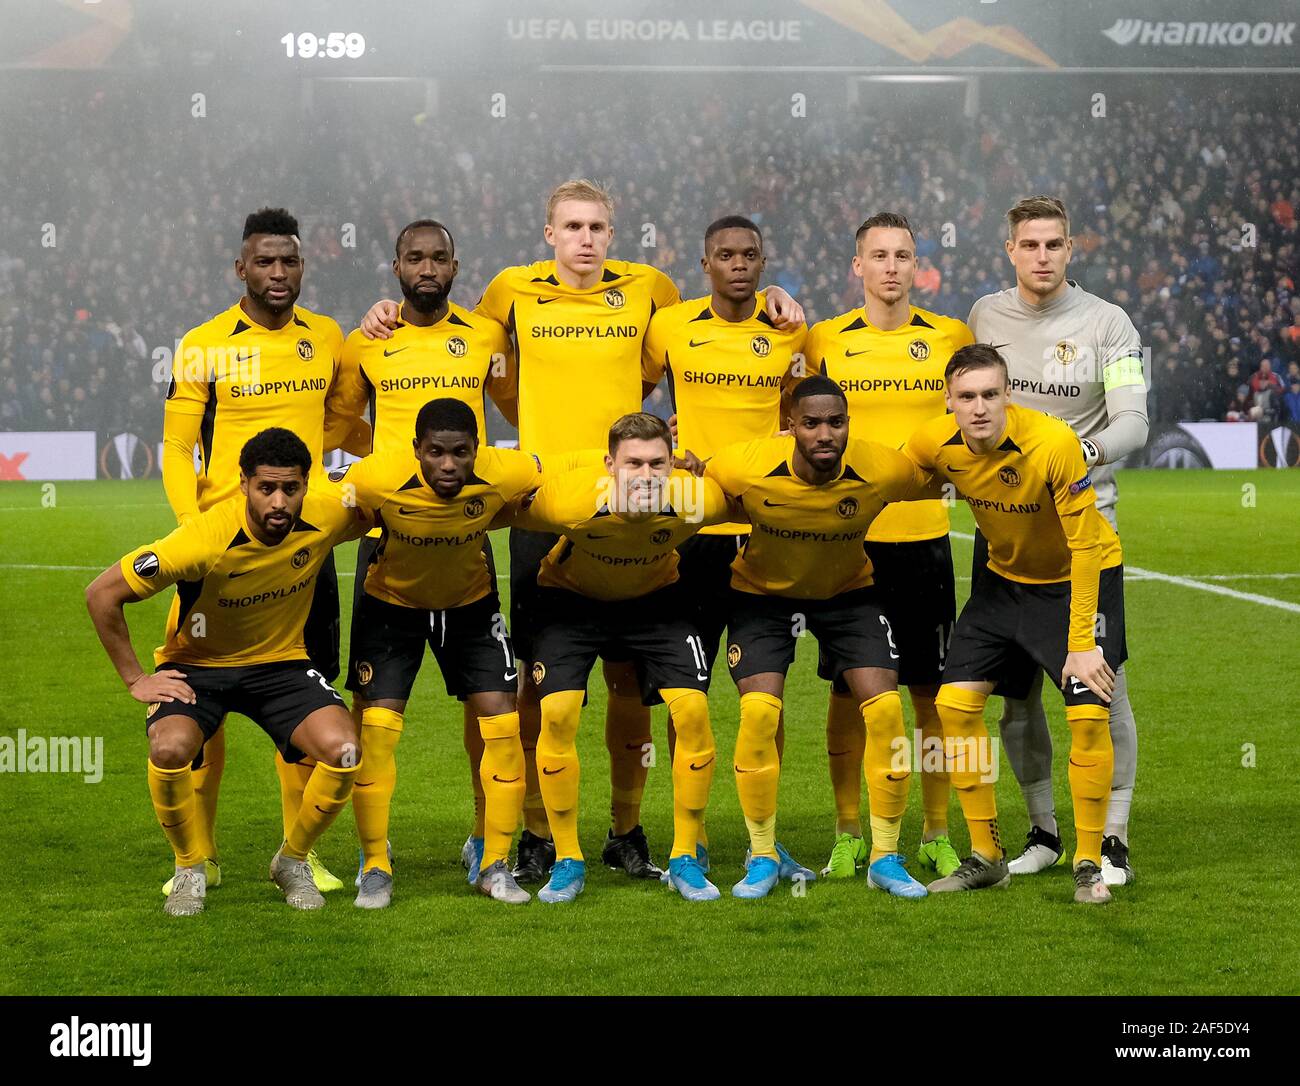 GLASGOW, SCOTLAND - DECEMBER 12: The Young Boys team lineup before the UEFA Europa League group G match between Rangers FC and BSC Young Boys at Ibrox Stadium on December 12, 2019 in Glasgow, United Kingdom. (Photo by Photo by Alex Todd/MB Media) Stock Photo